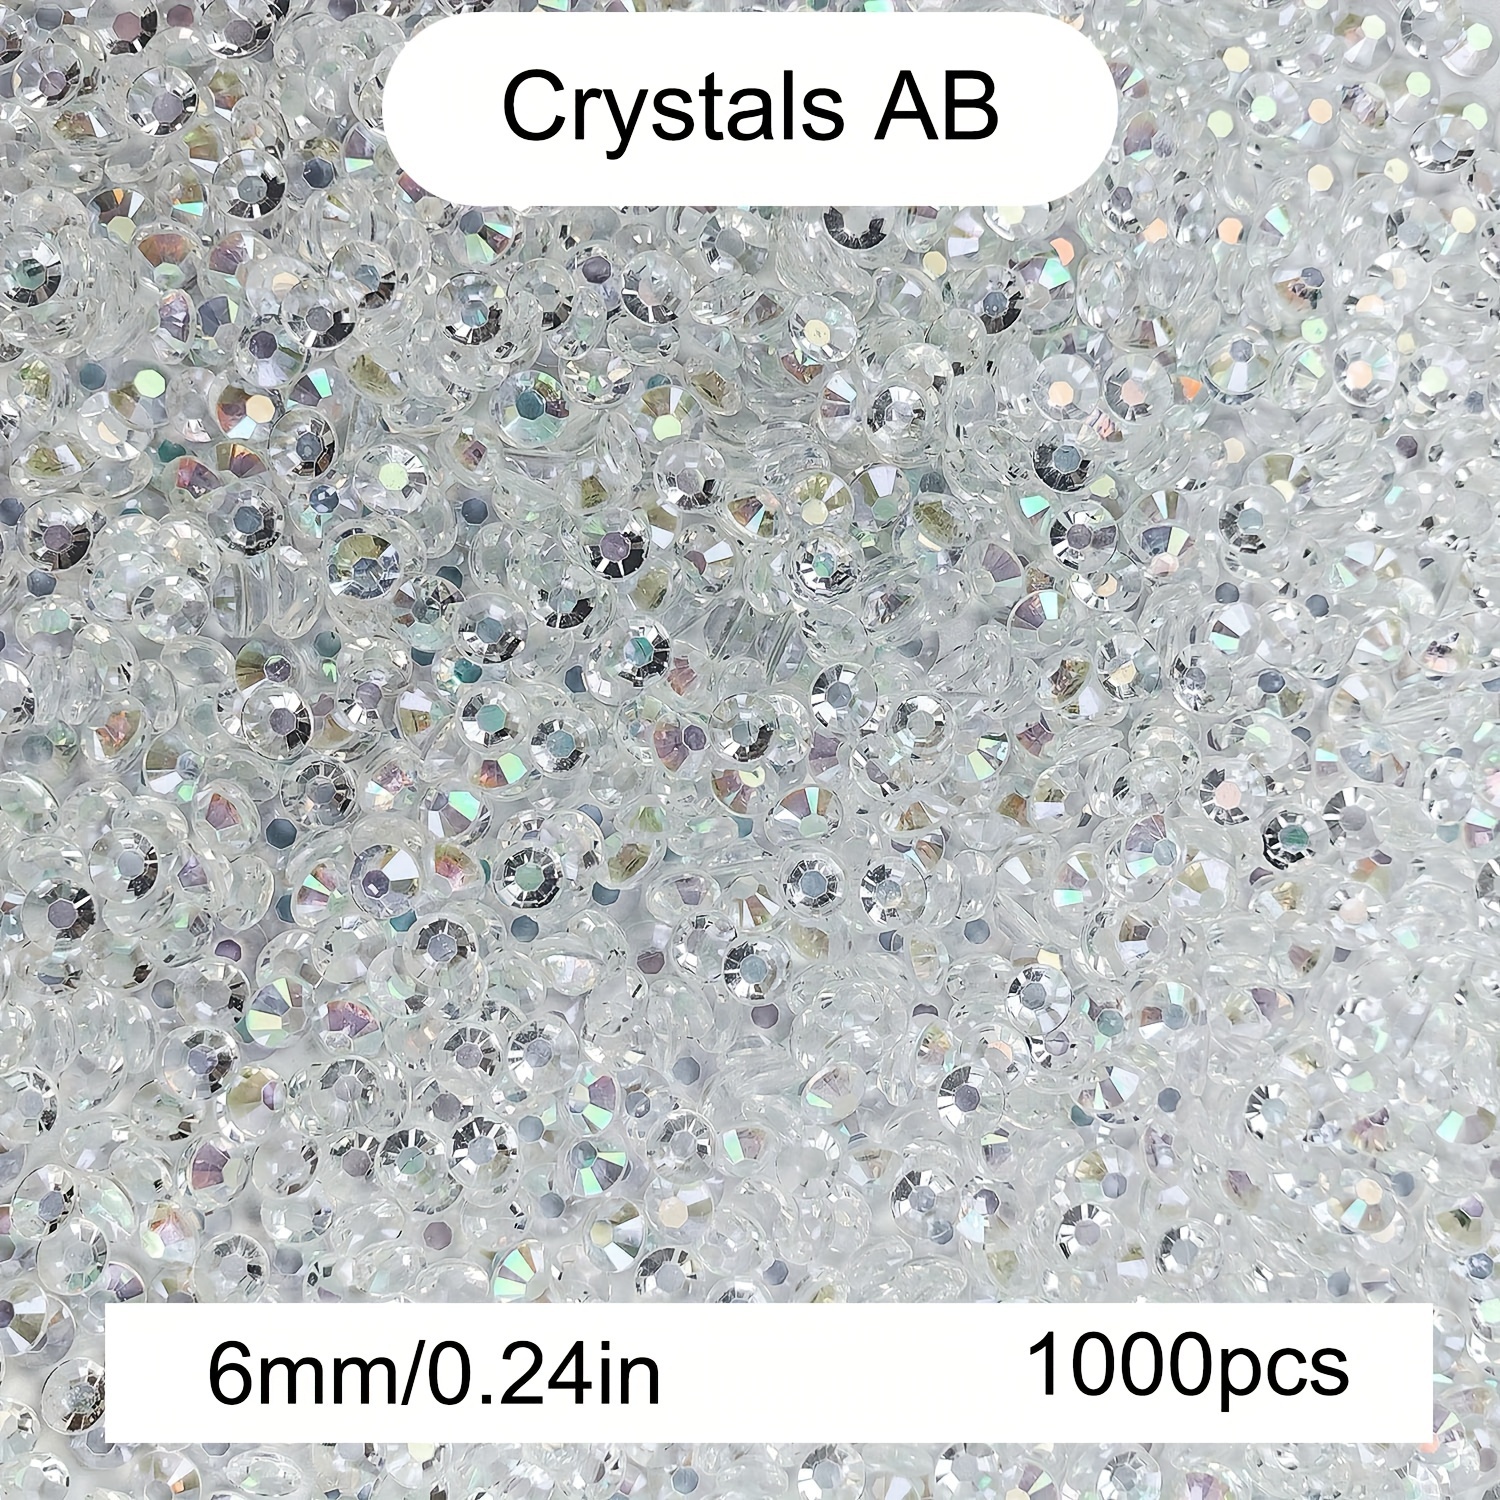 1000pcs 5mm Round Flatback Crystals Rhinestone Glitter for Crafts Nails Face Art 1000pcs/set in Red